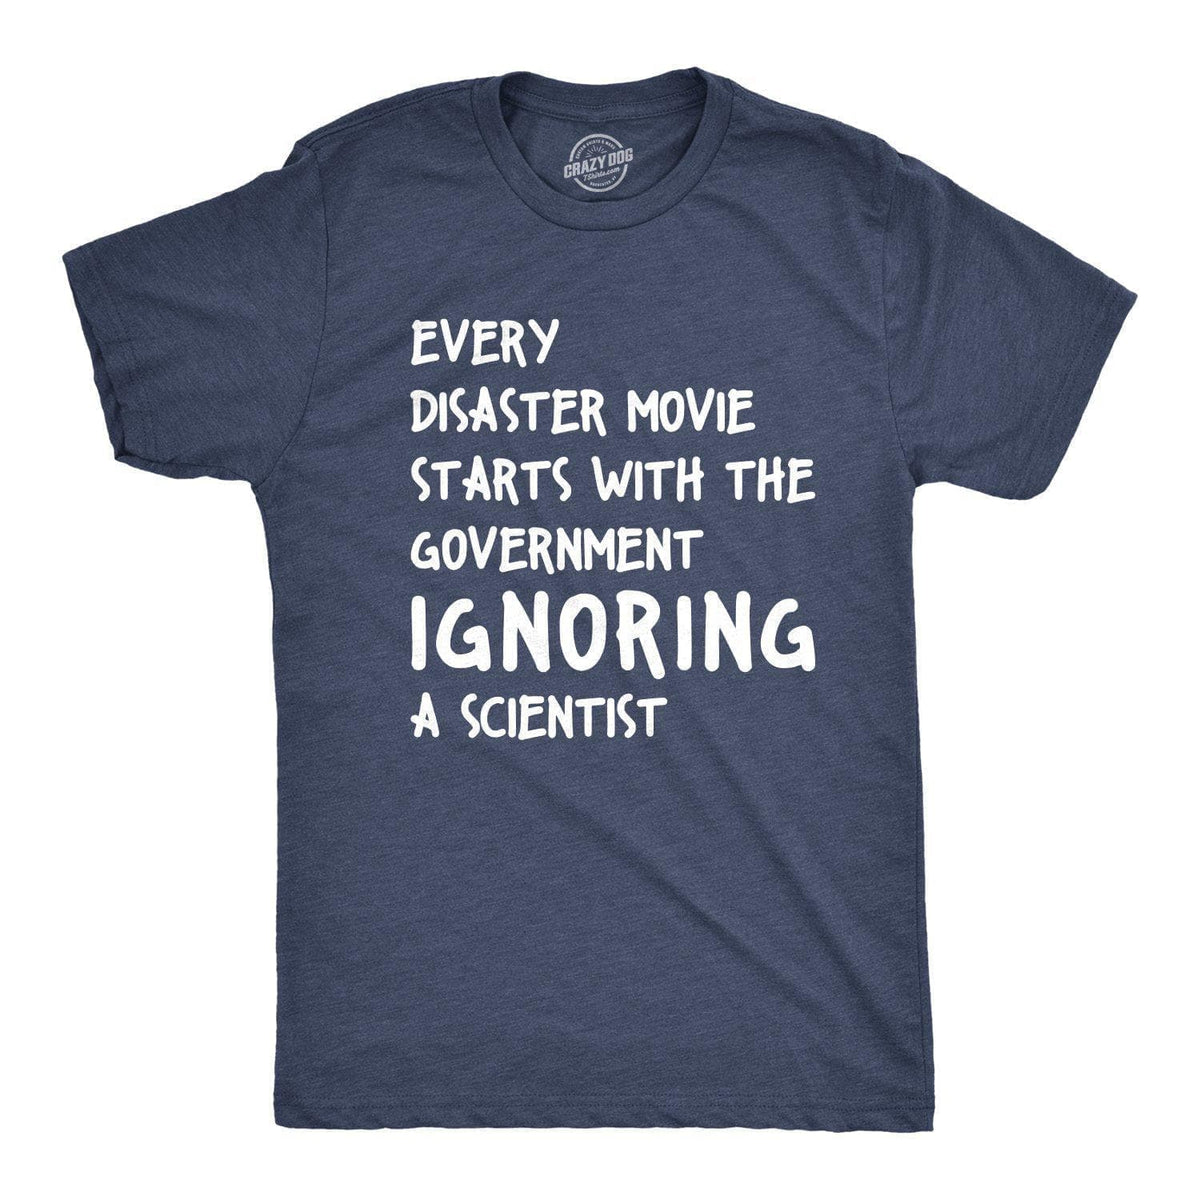 Crazy Dog T-Shirts Mens Every Disaster Movie Starts With Government Ignoring Science Funny T shirt, Men's, Size: Small, Blue